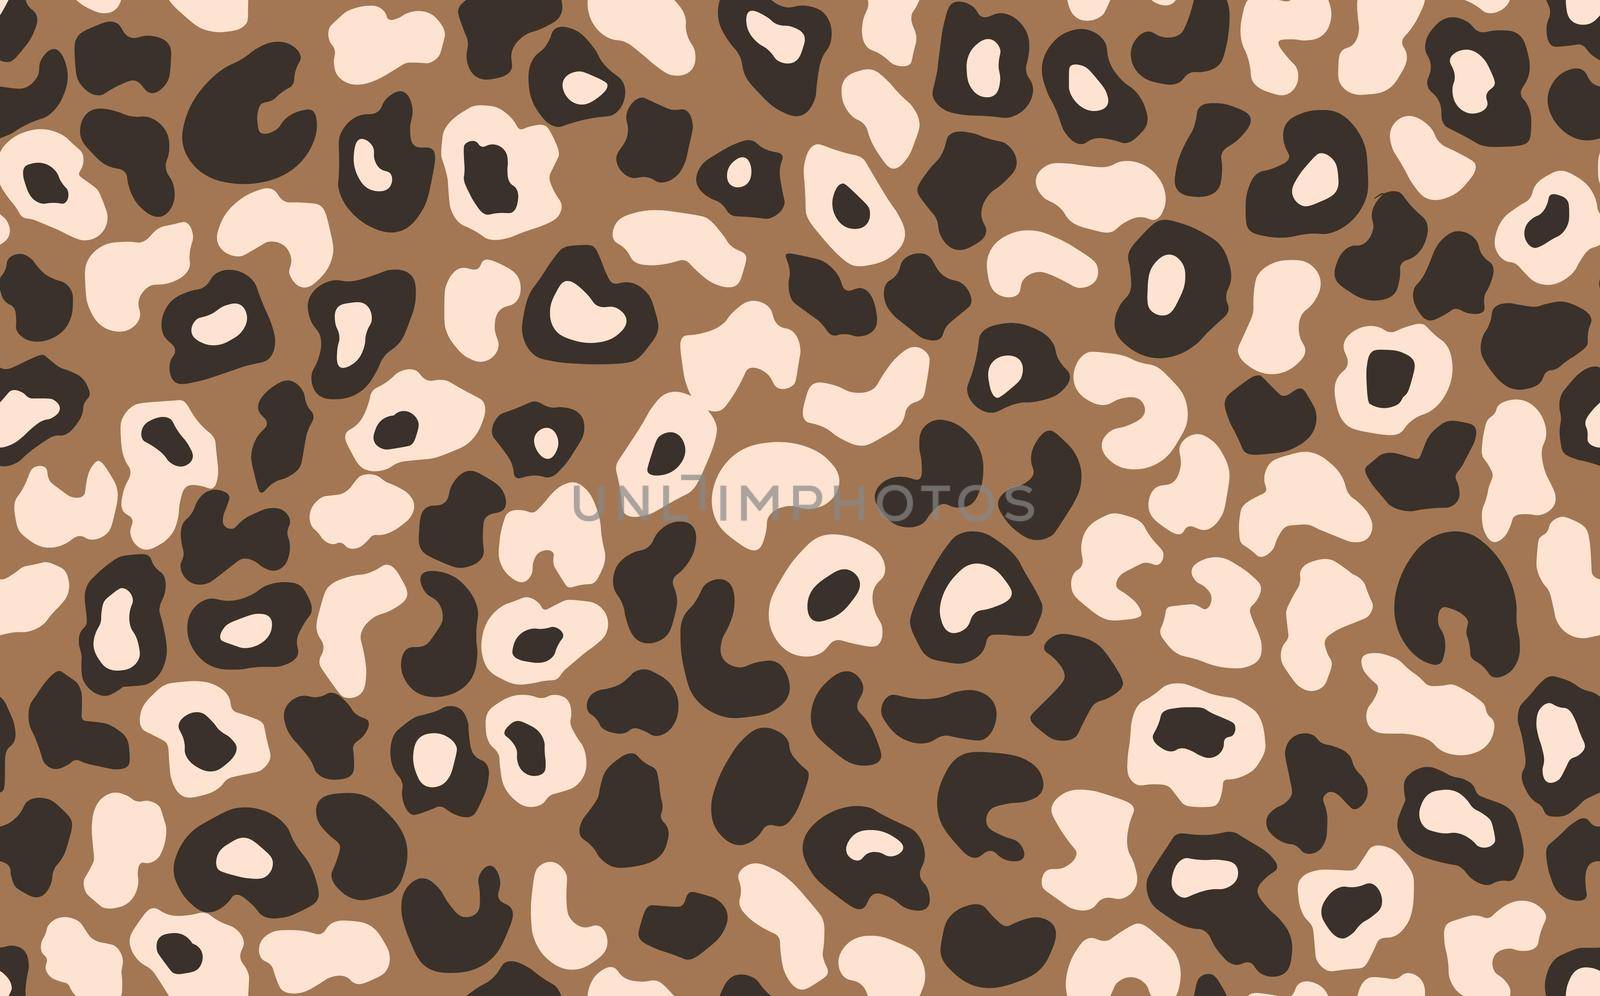 Abstract modern leopard seamless pattern. Animals trendy background. Brown decorative vector stock illustration for print, card, postcard, fabric, textile. Modern ornament of stylized skin.